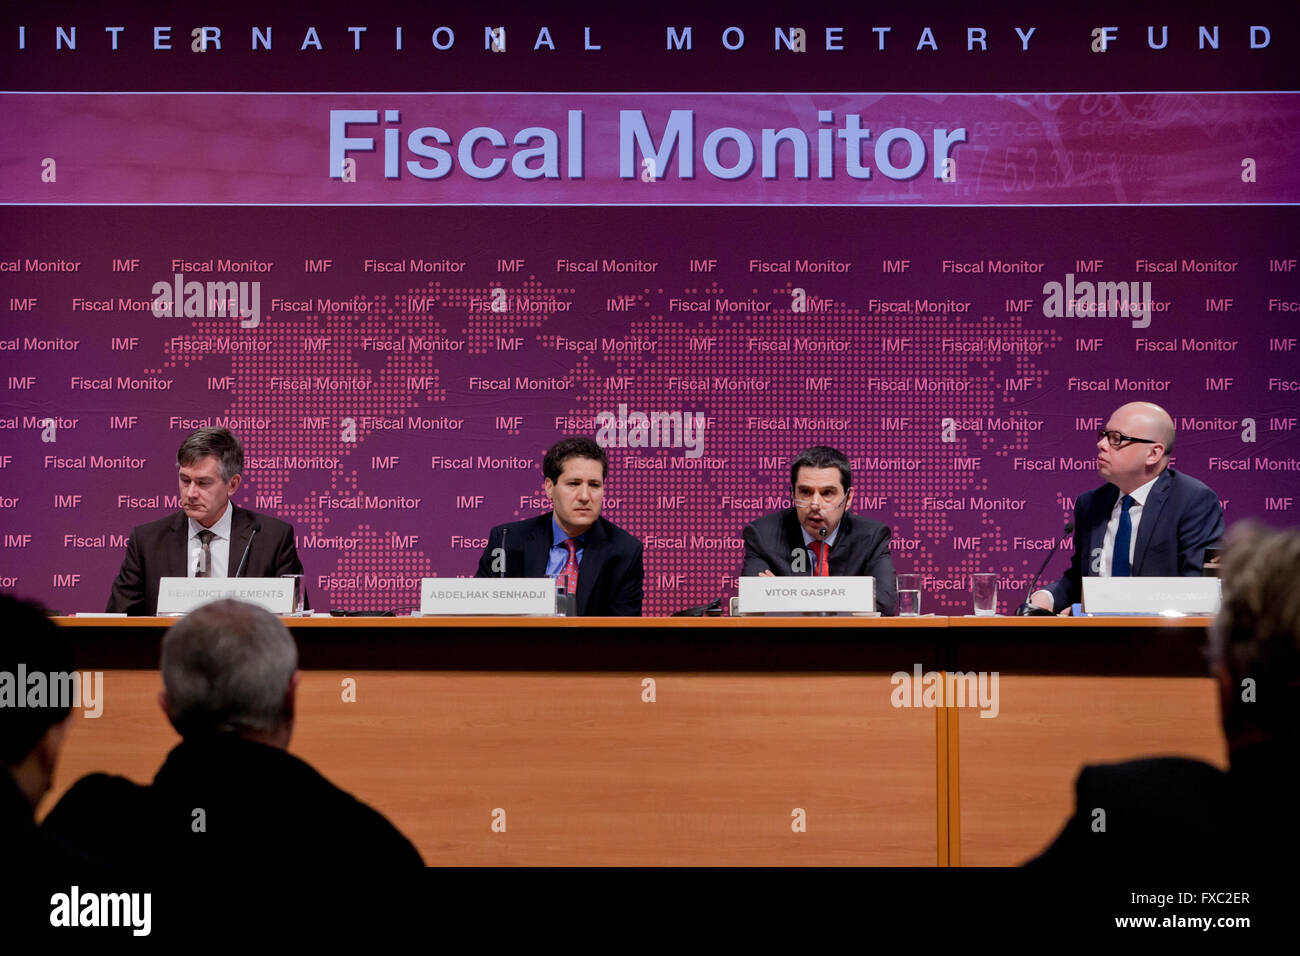 Washington DC, USA. 13th April, 2016. The Director of the International Monetary Fund Fiscal Affairs Department, Vitor Gaspar, along with Abdelhak Senhadji, Deputy Director, Benedict Clements, Division Chief, Fiscal Policy and Surveillance Division, and Wiktor Krzyzanowski, Senior Press Officer, Communications Department, briefs the media on its Fiscal policies for Innovation and growth. Credit:  B Christopher/Alamy Live News Stock Photo